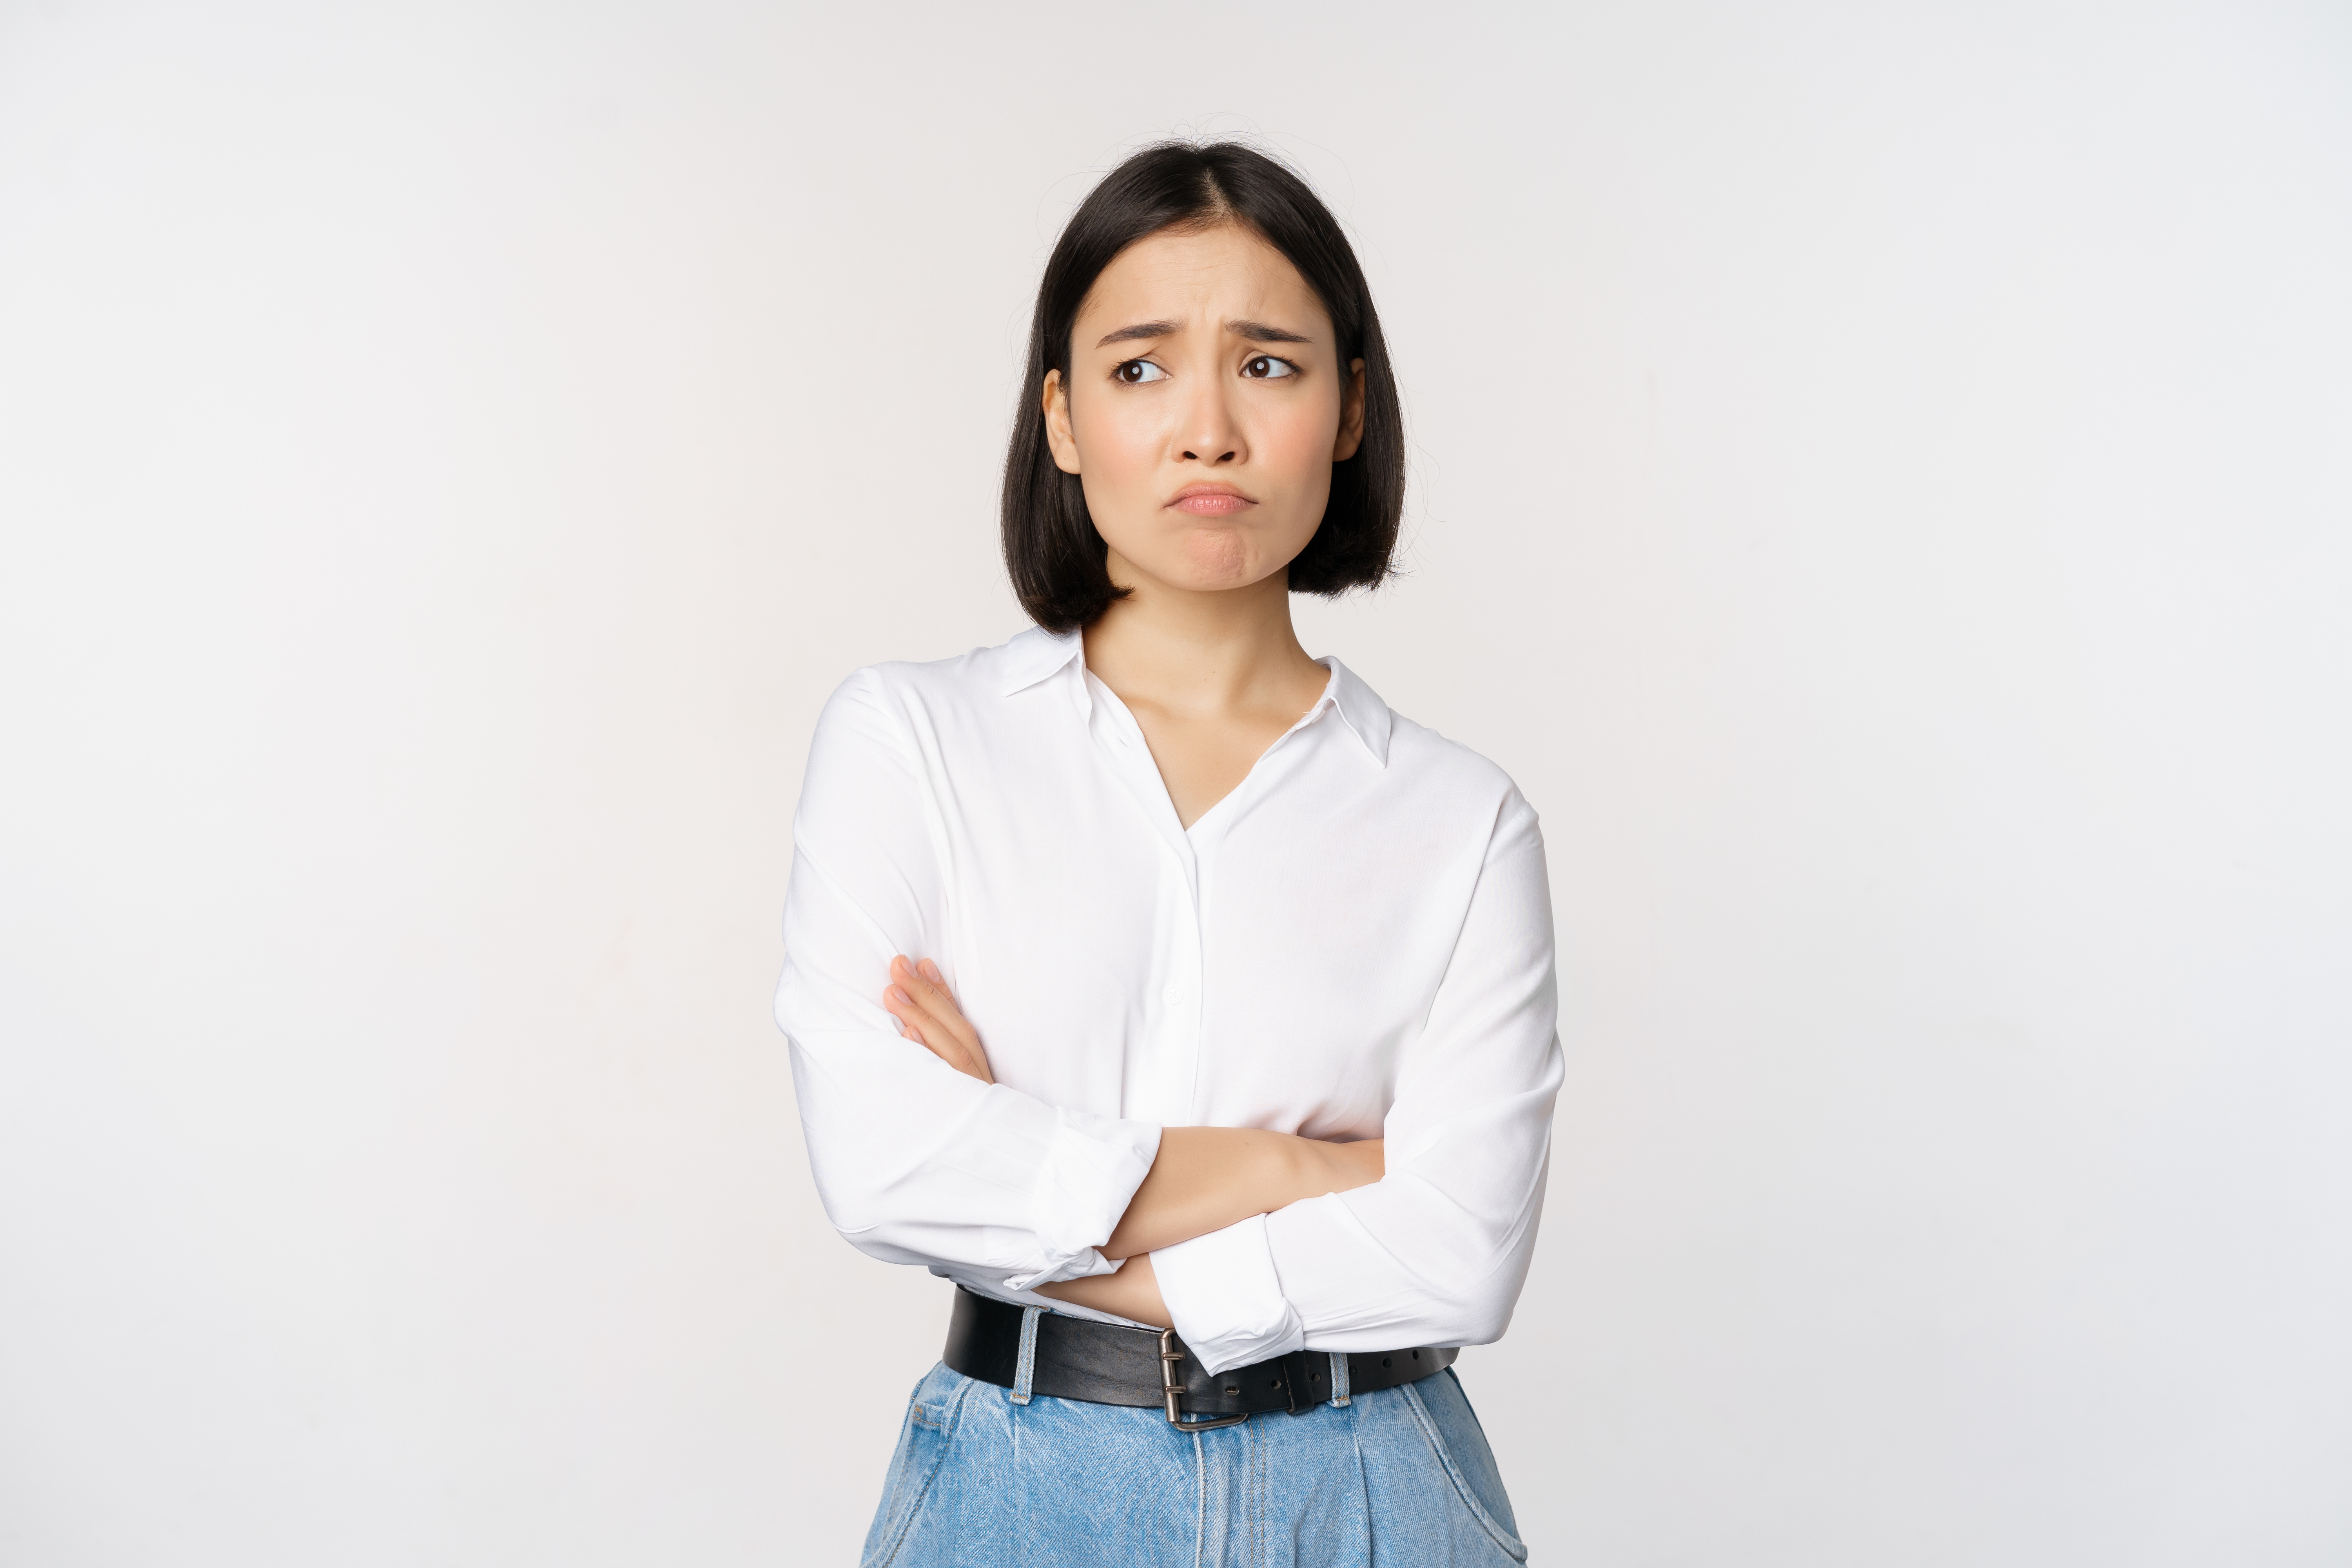 Upset woman with her arms crossed | Source: Shutterstock